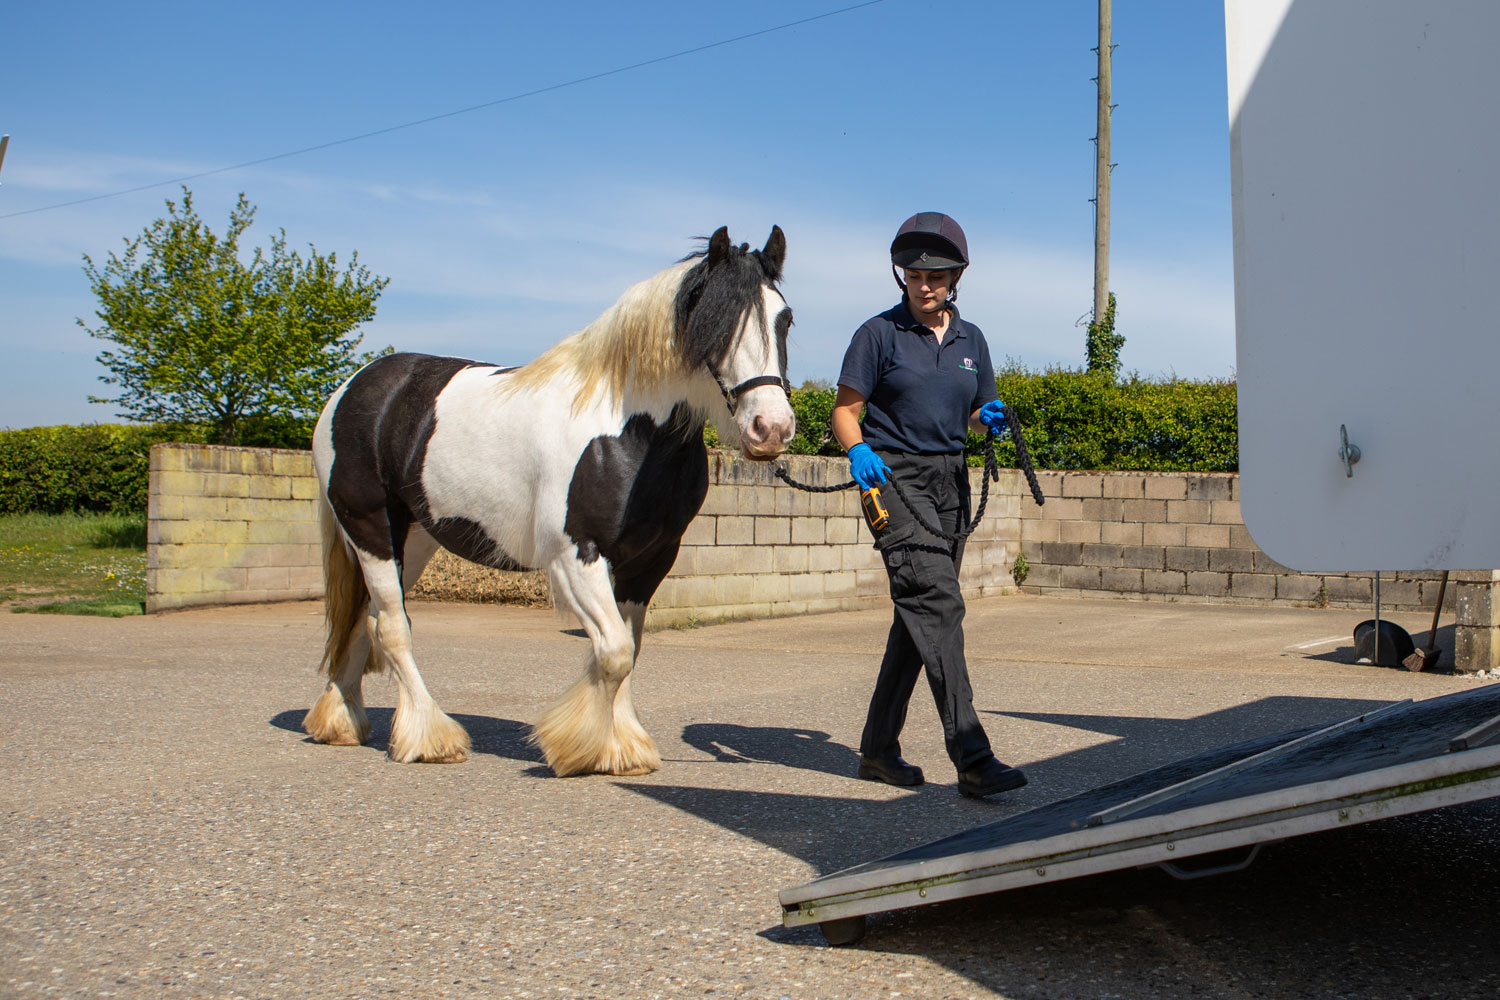 Travelling your horse safely